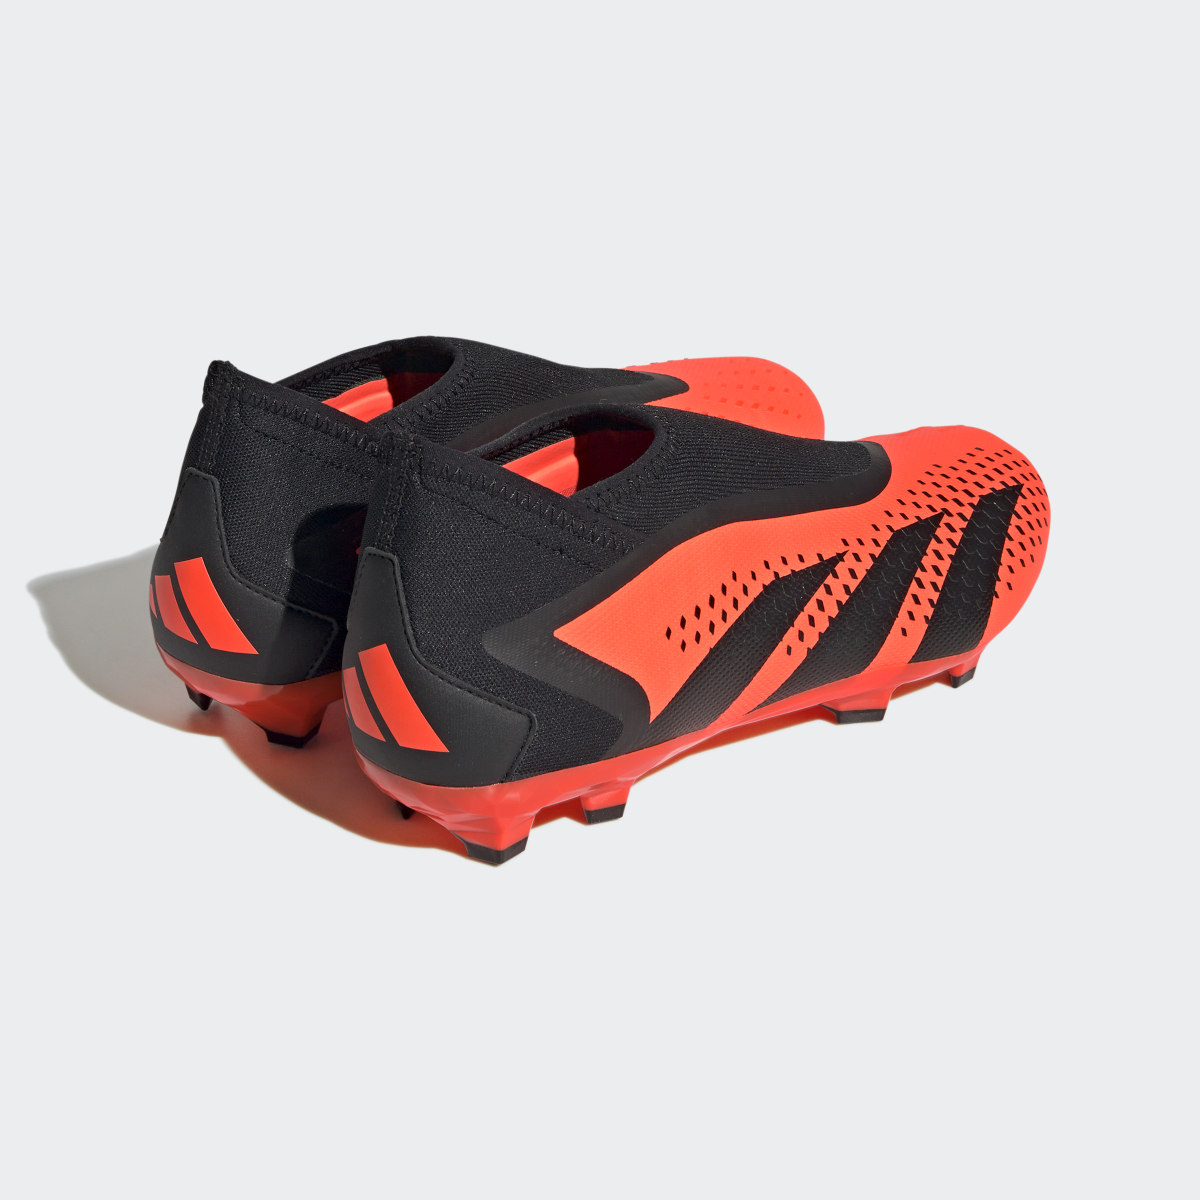 Adidas Predator Accuracy.3 Laceless Firm Ground Cleats. 6